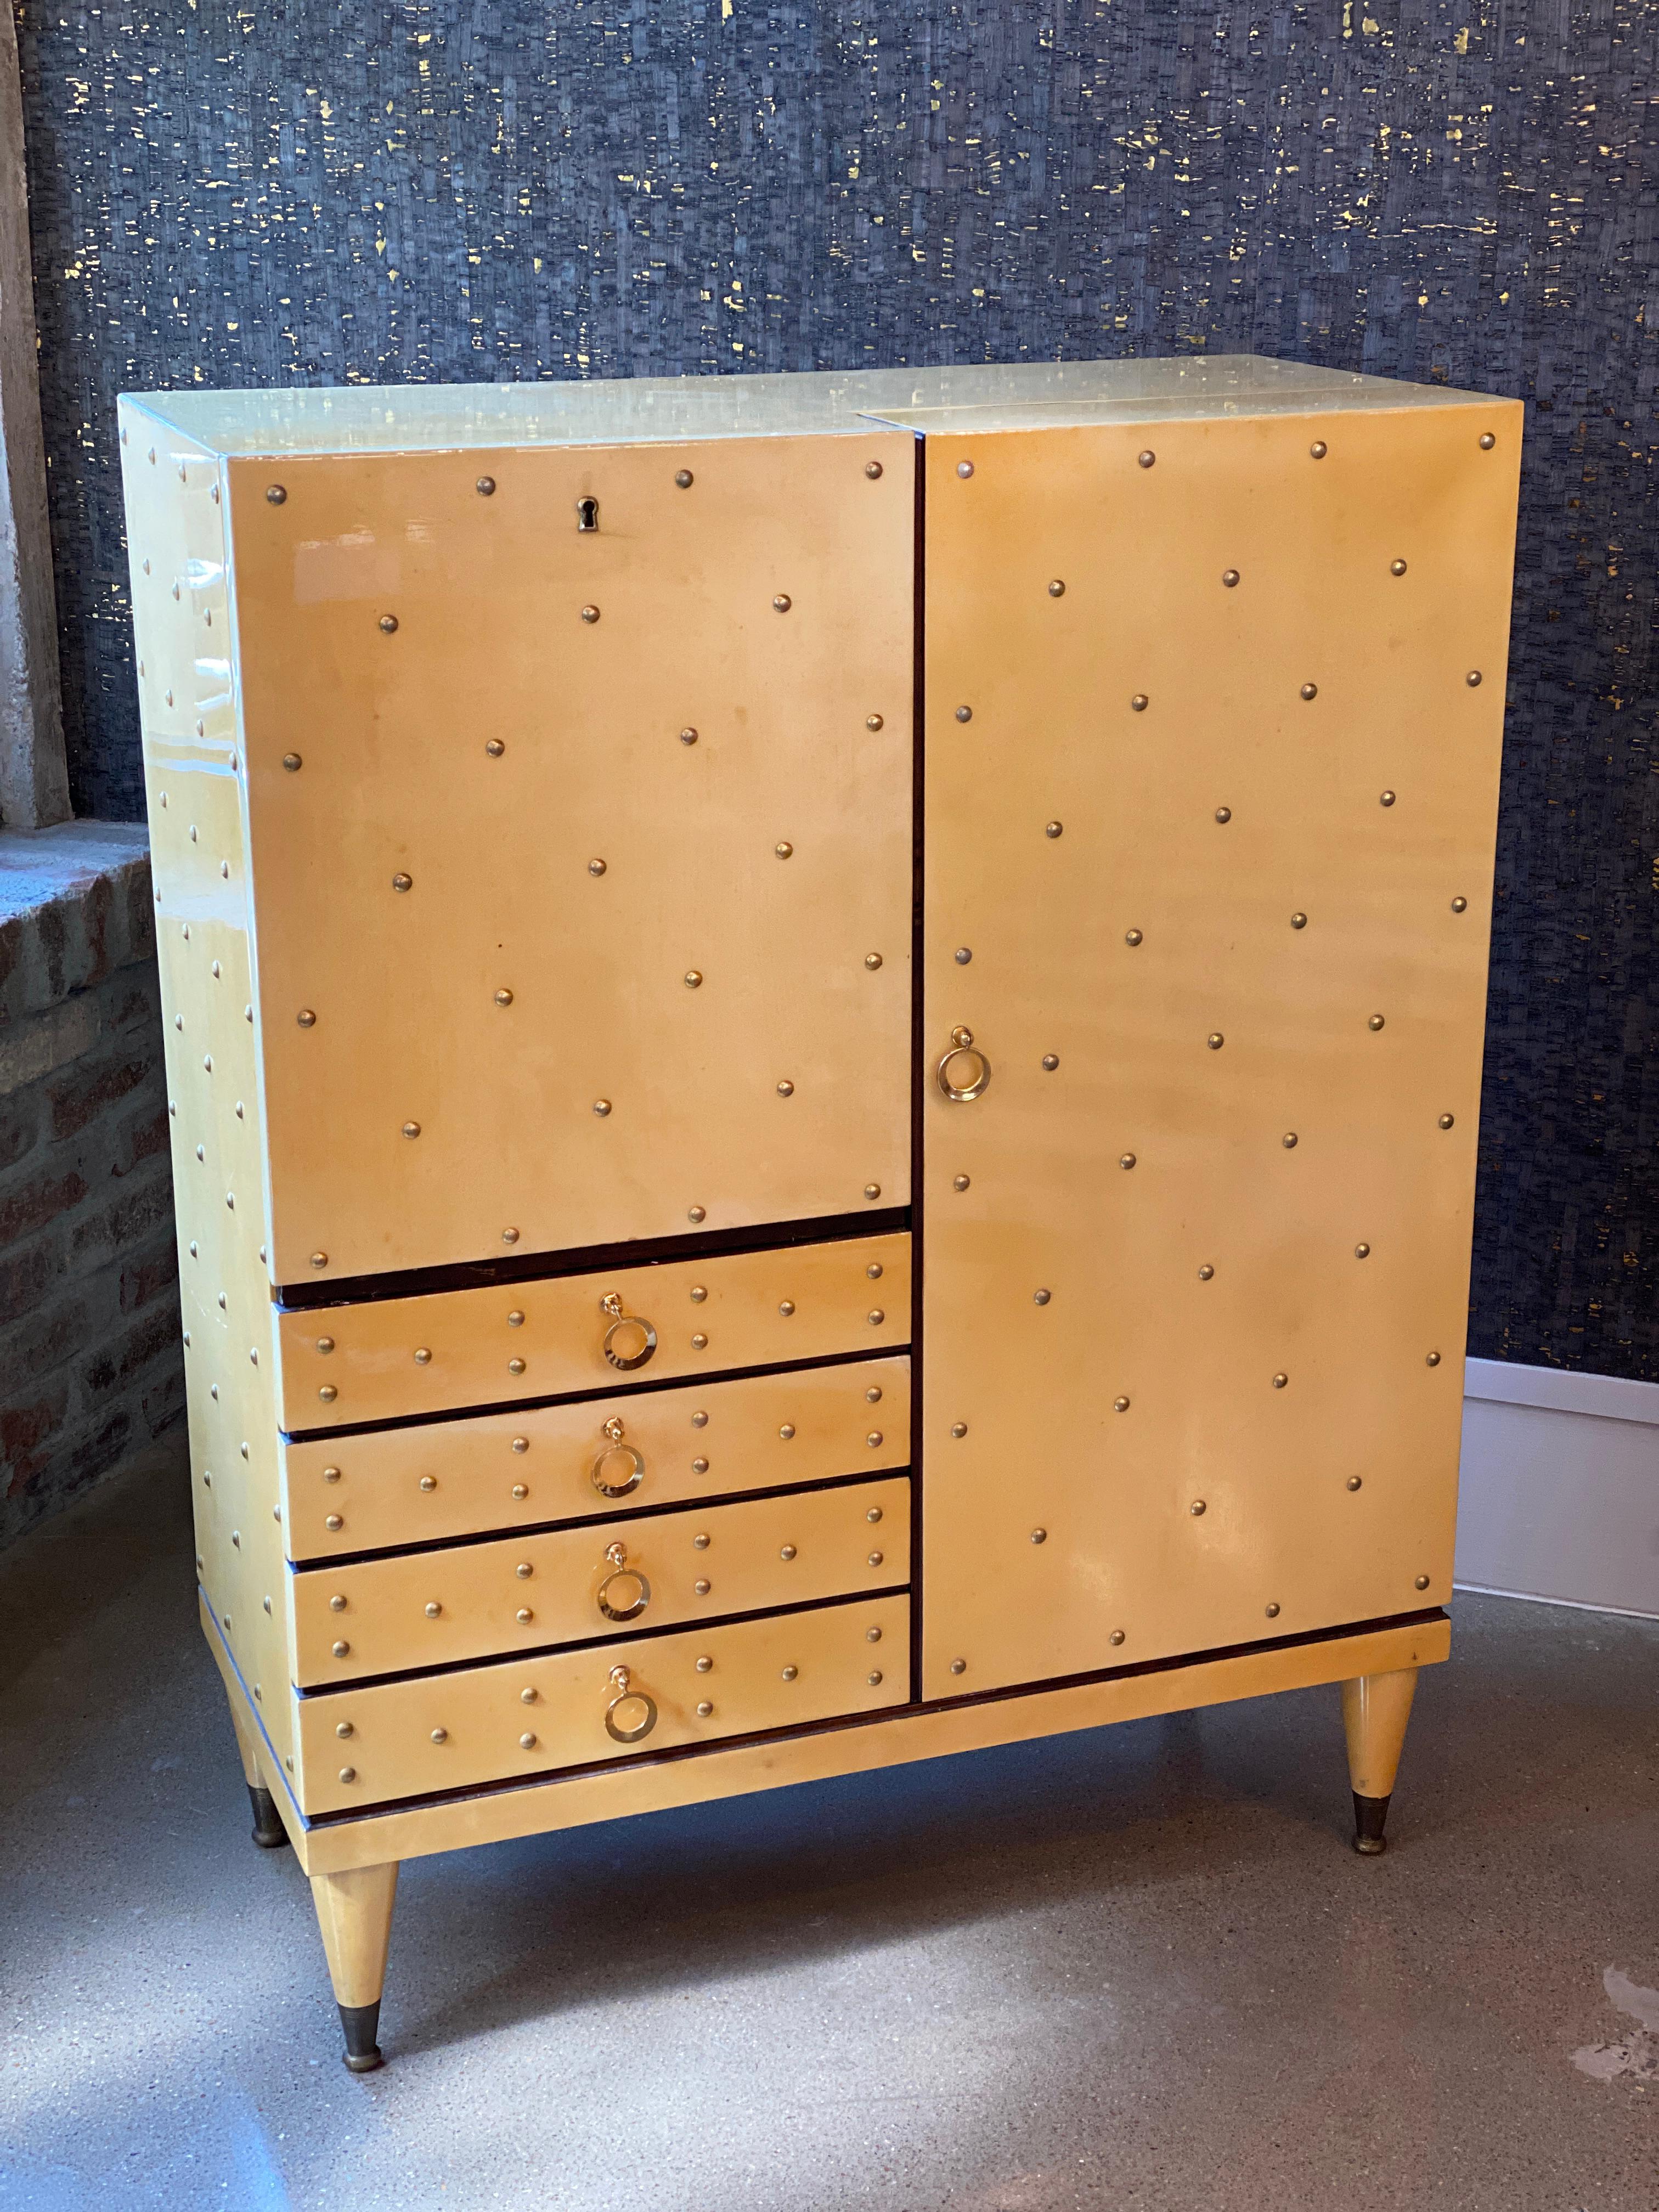 Lacquered goatskin parchment bar cabinet by famed maker, Aldo Tura. Includes cabinet storage, drawer, and drop down surface with mirrored interior. Fine brass hardware and trim. Considered European Mid-Century Modern but with a Hollywood Regency